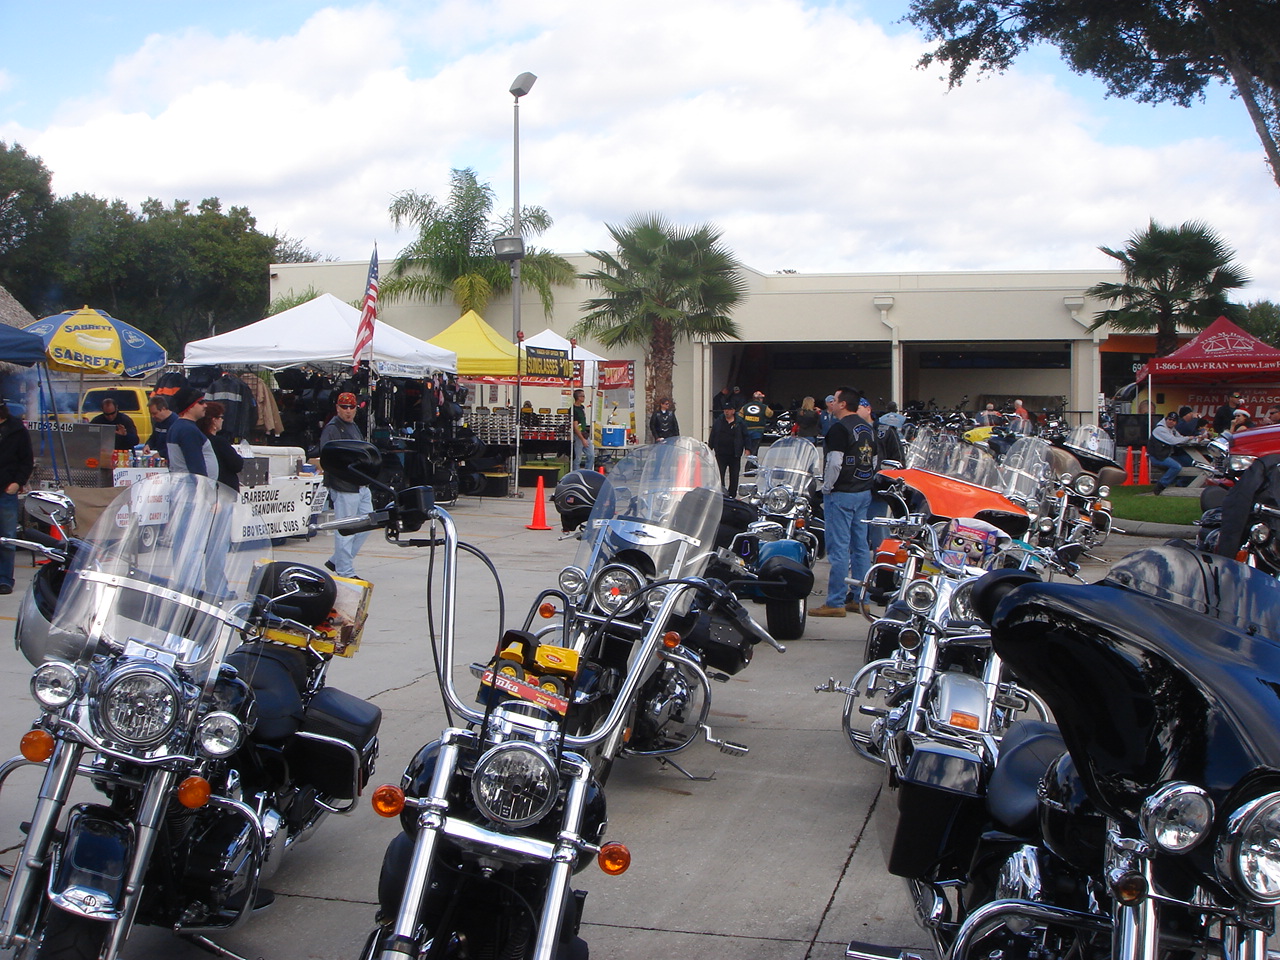 Motorcycles lined up and ready to roll.